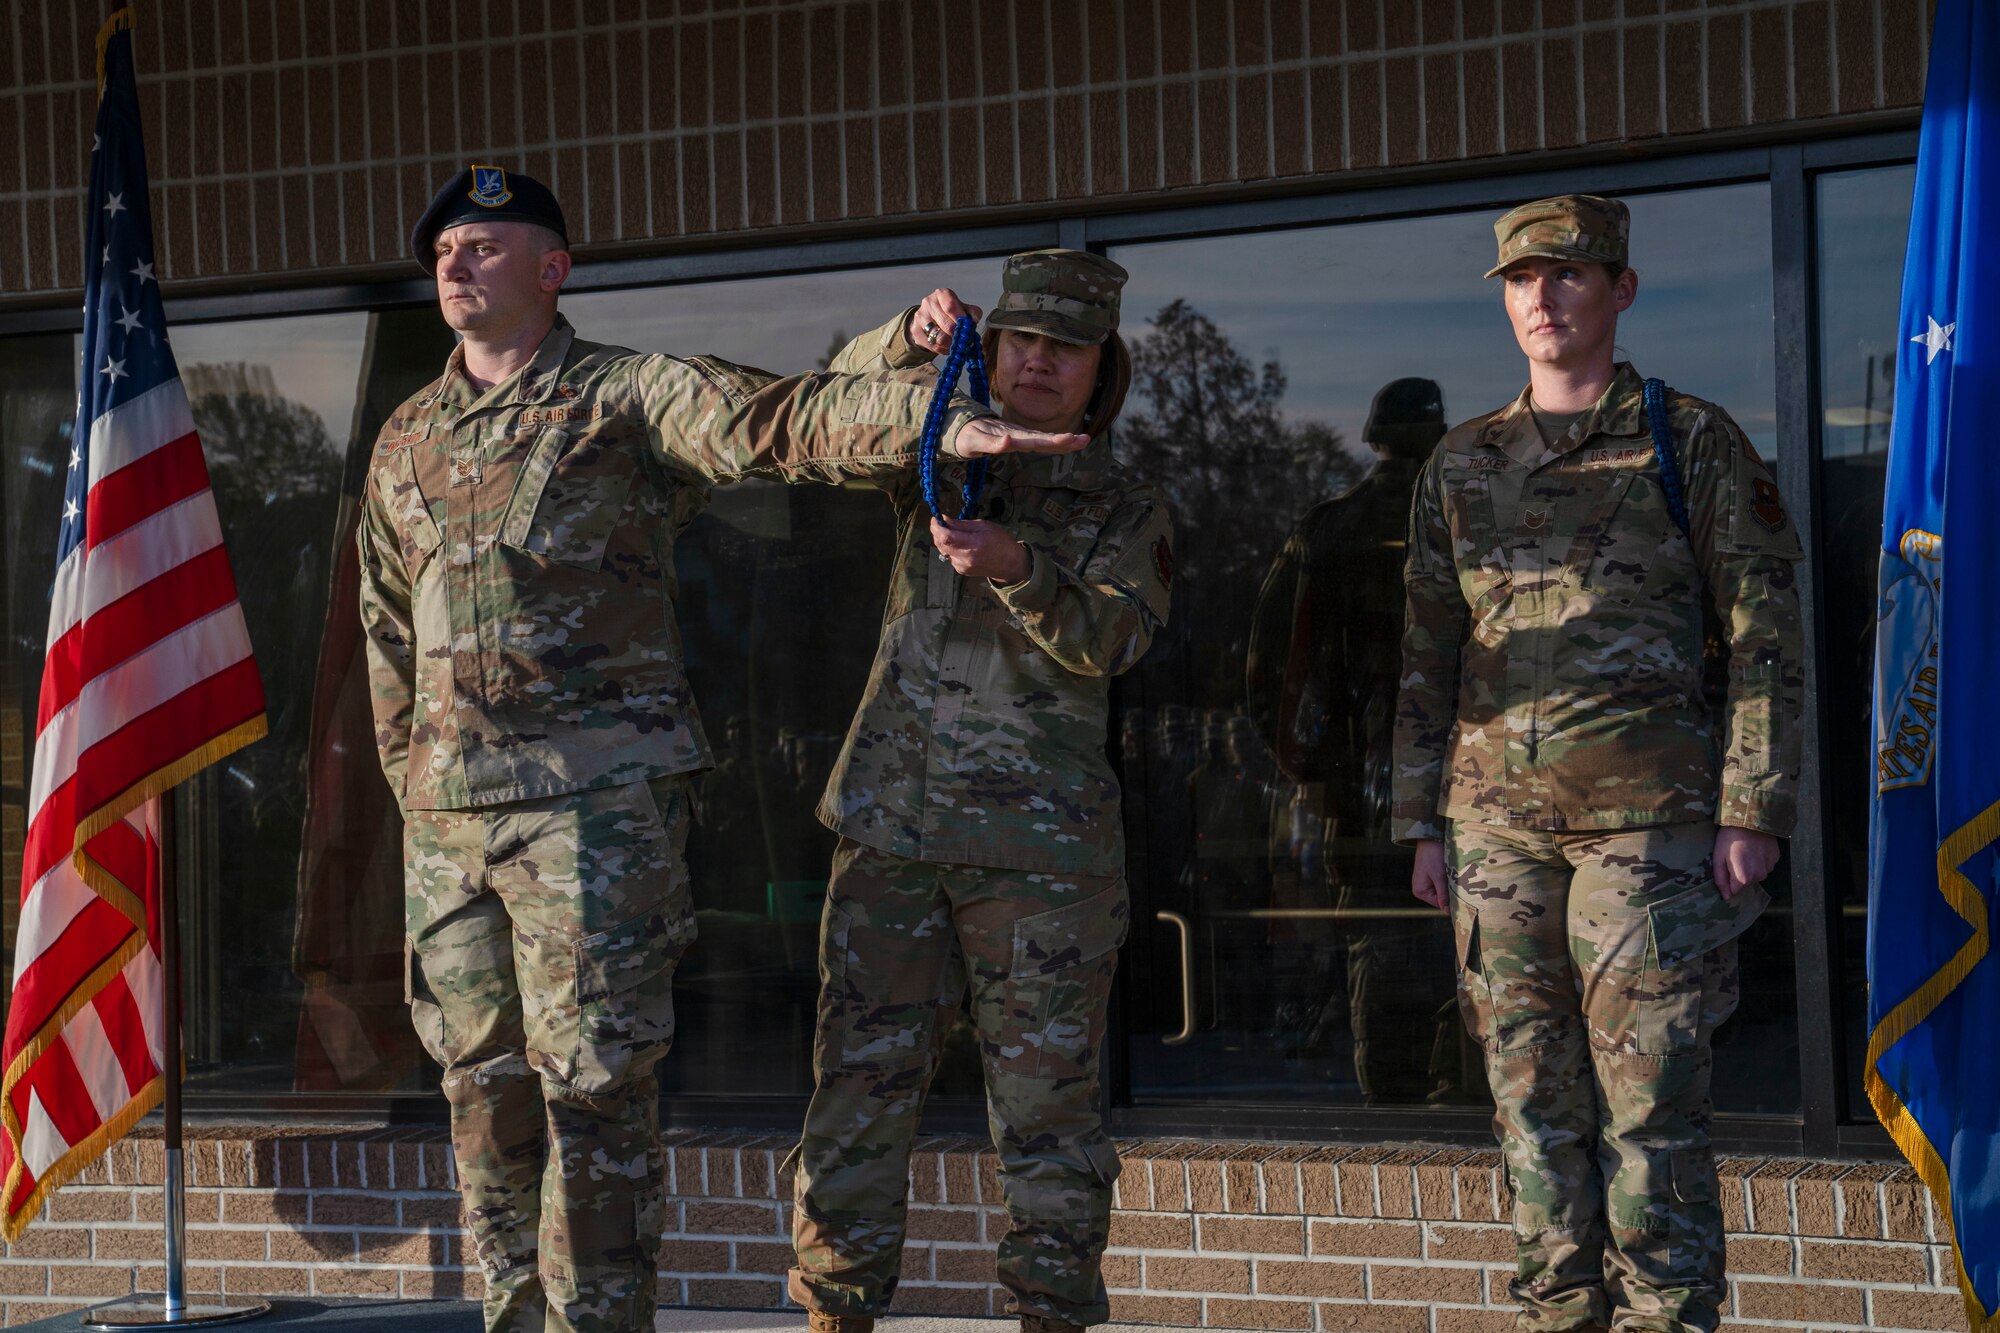 Chief Master Sgt. of the Air Force JoAnne S. Bass conducts an End of Watch’ retiring of the aiguillette ceremony on Keesler Air Force Base, Mississippi, Dec. 19, 2023.